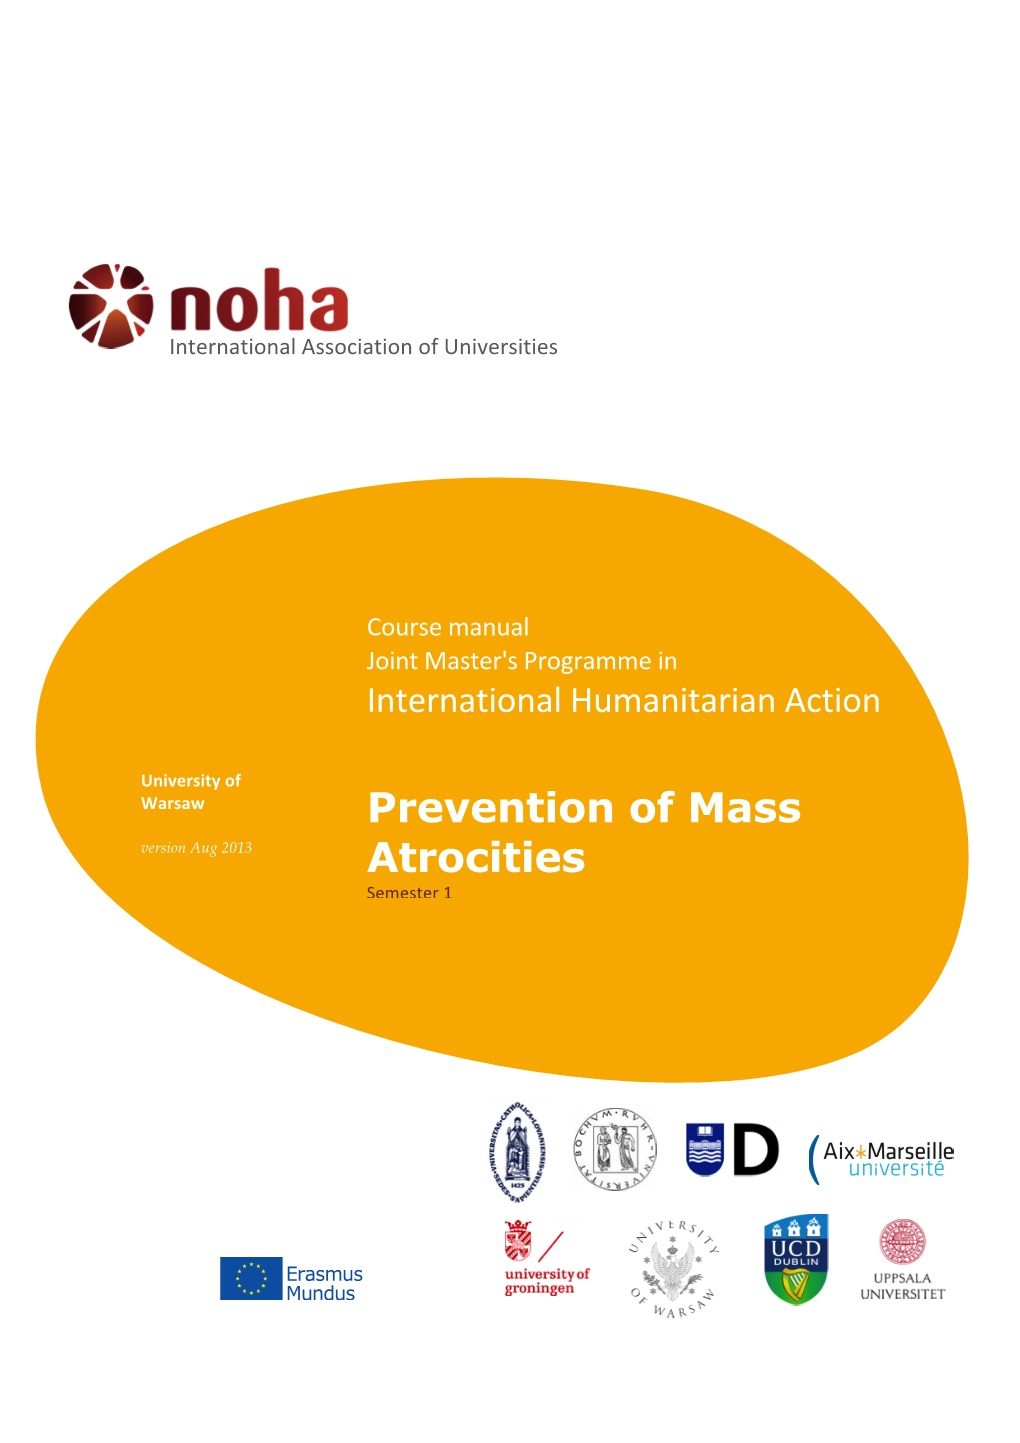 Prevention of Mass Atrocities - Explaining Major Categories and Definitions - Actors - Goals of the Course - Warsaw As a Memorial City